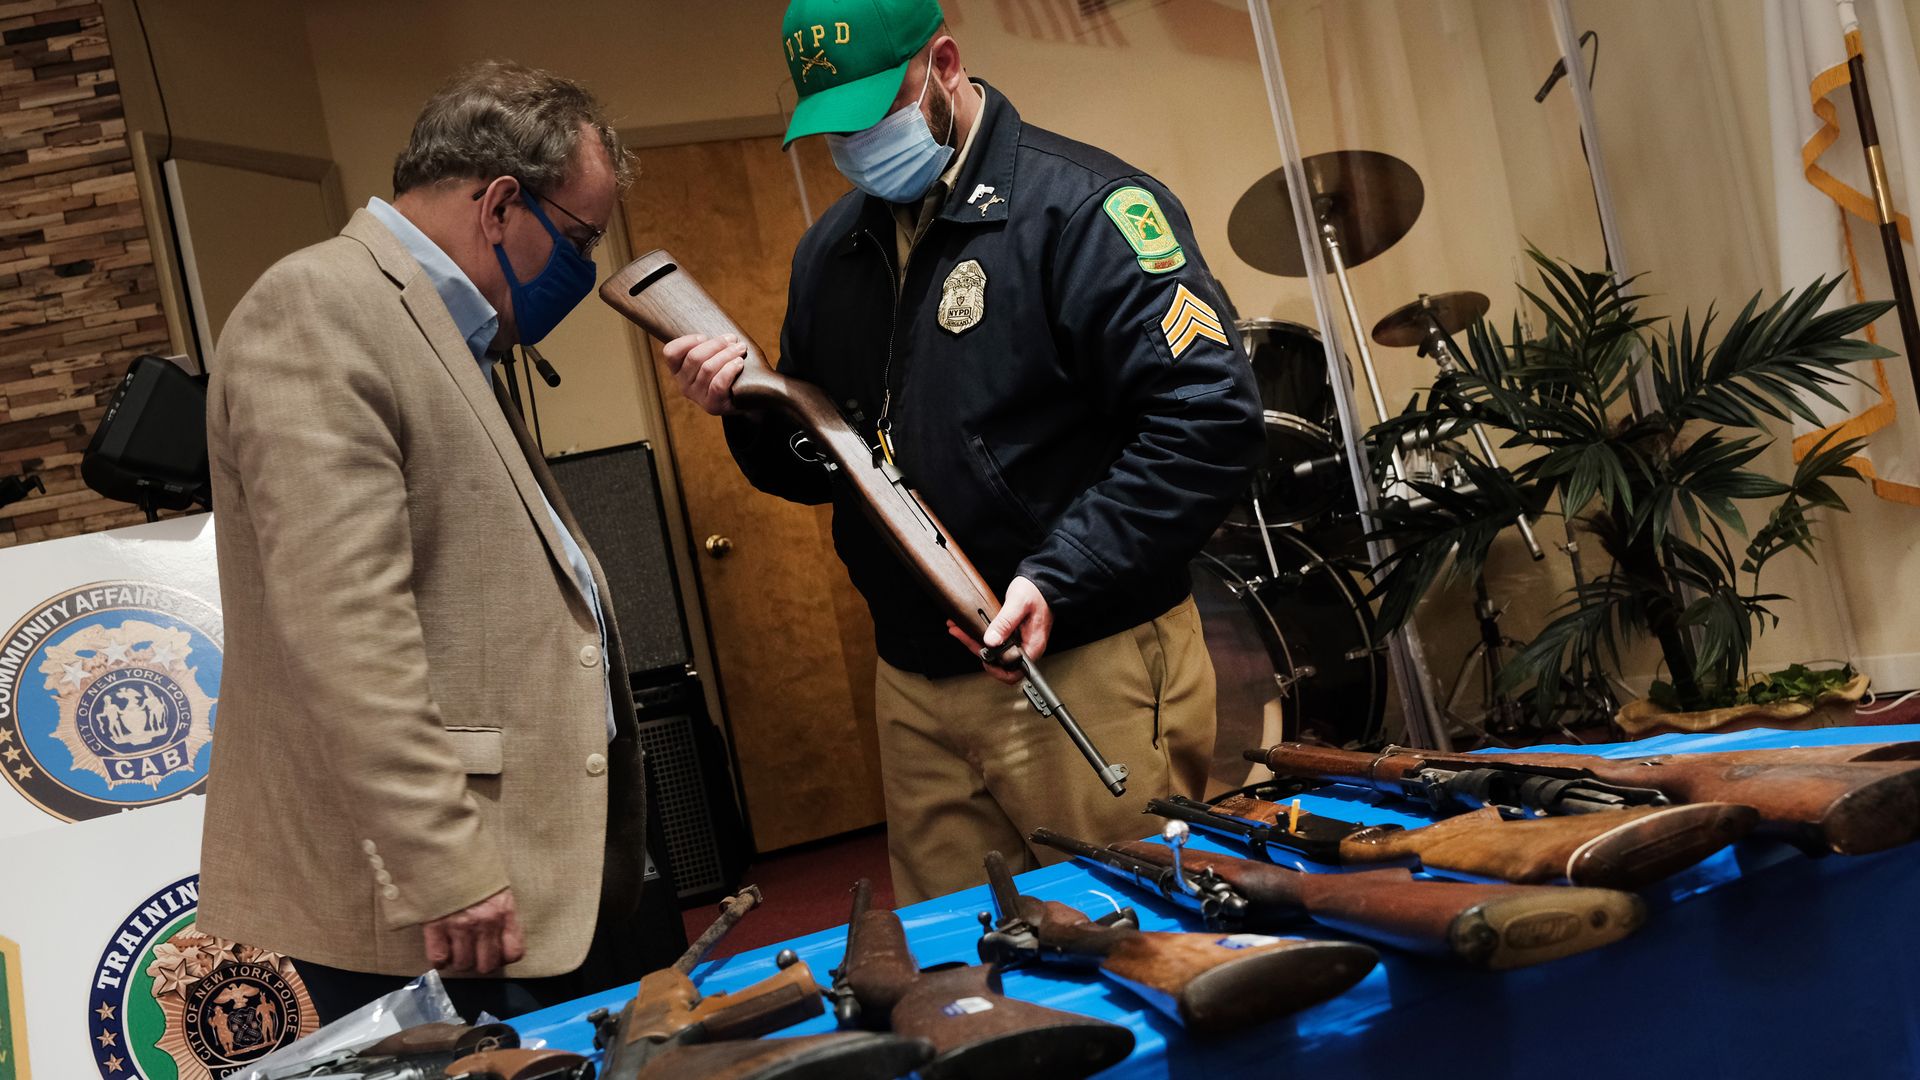 A police officer holds a gun at a gun buy-back event.